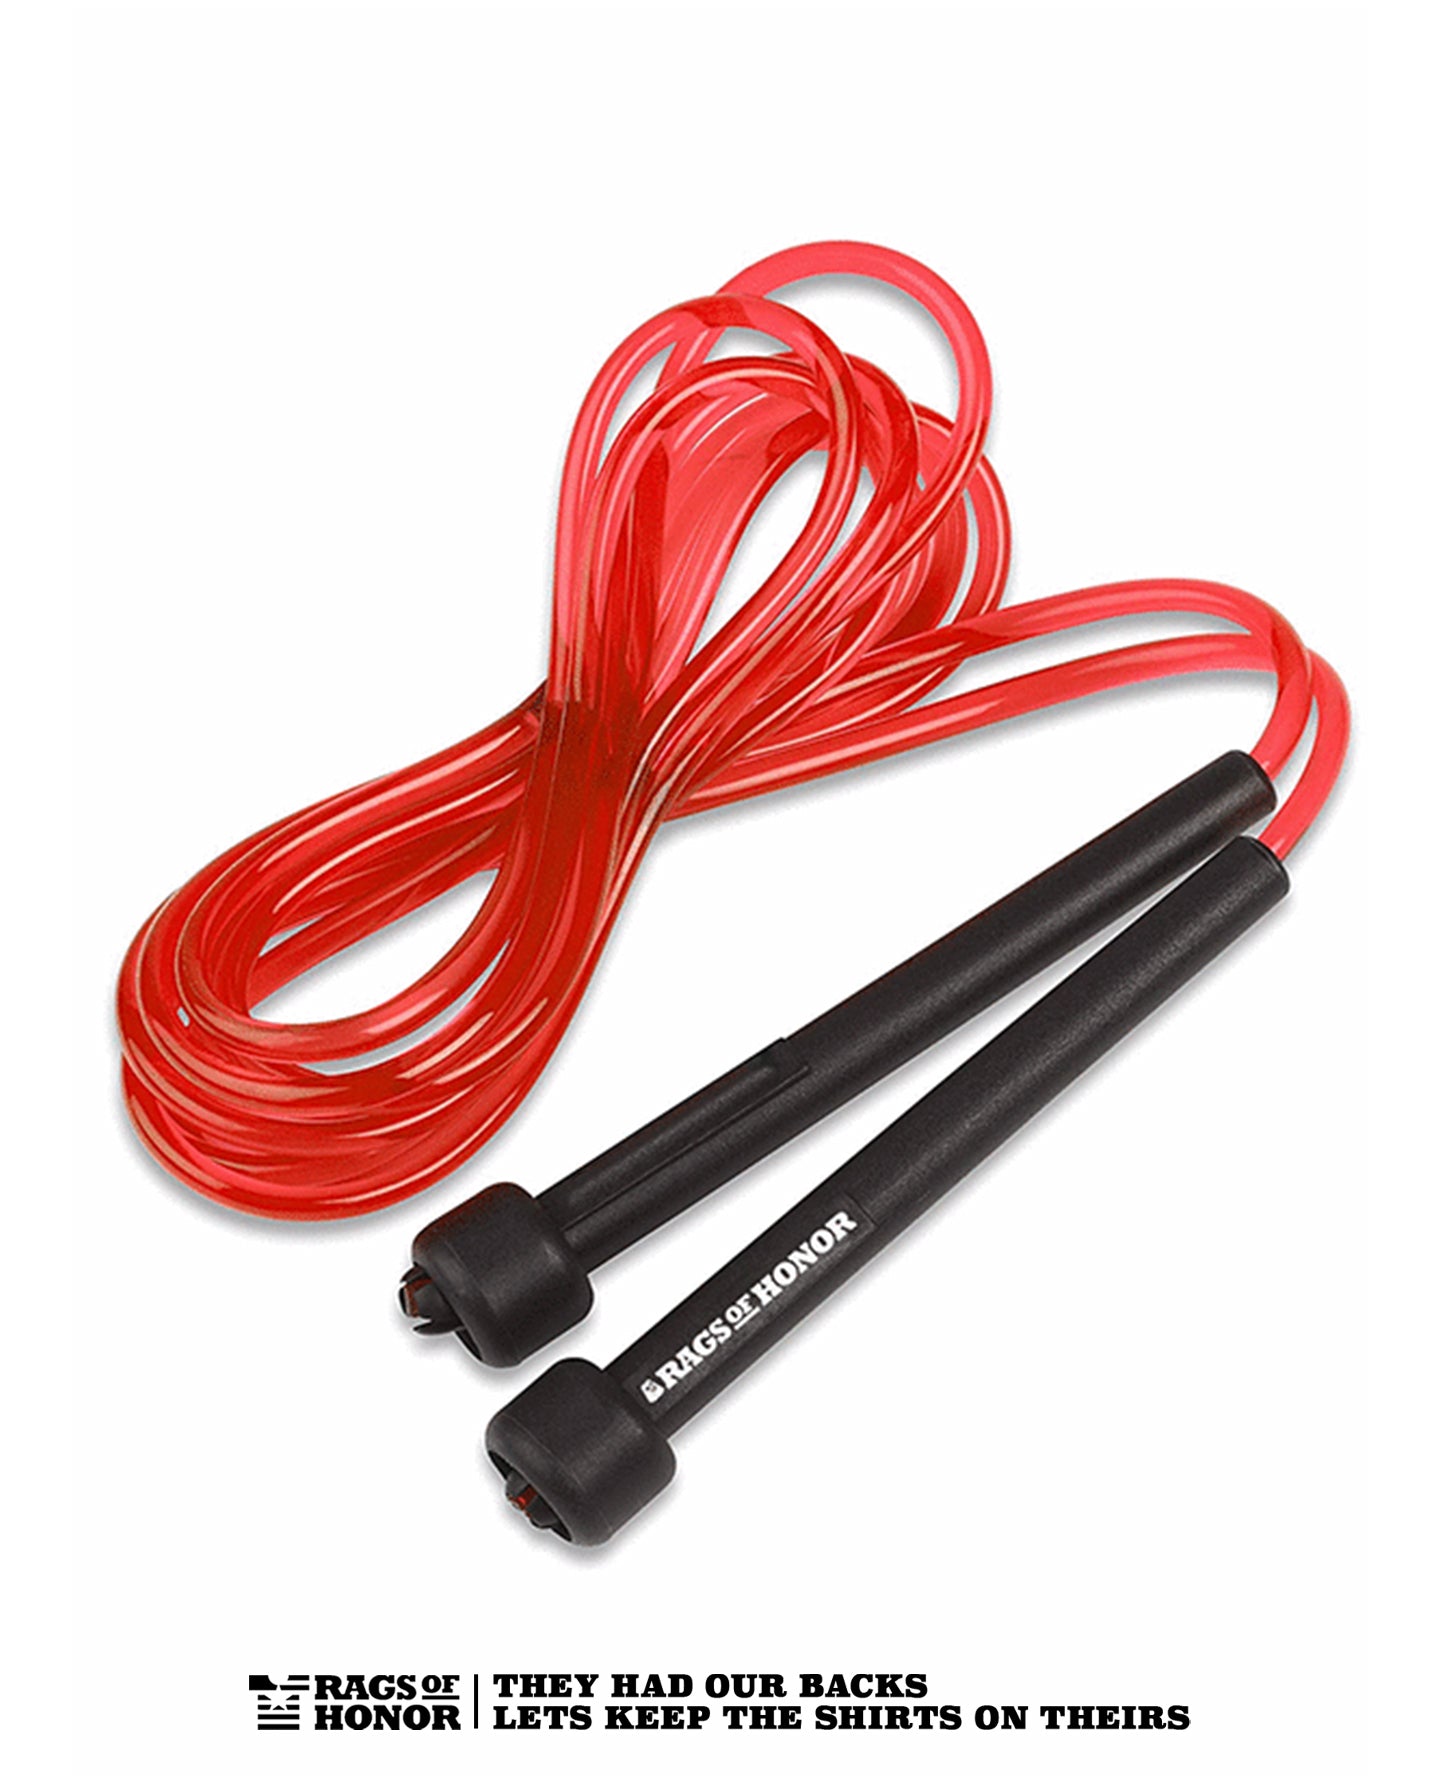 Limited Edition: 'Jump for Vets 21' Adjustable PVC Jump Rope for Cardio Fitness - Versatile Jump Rope for Both Kids and Adults